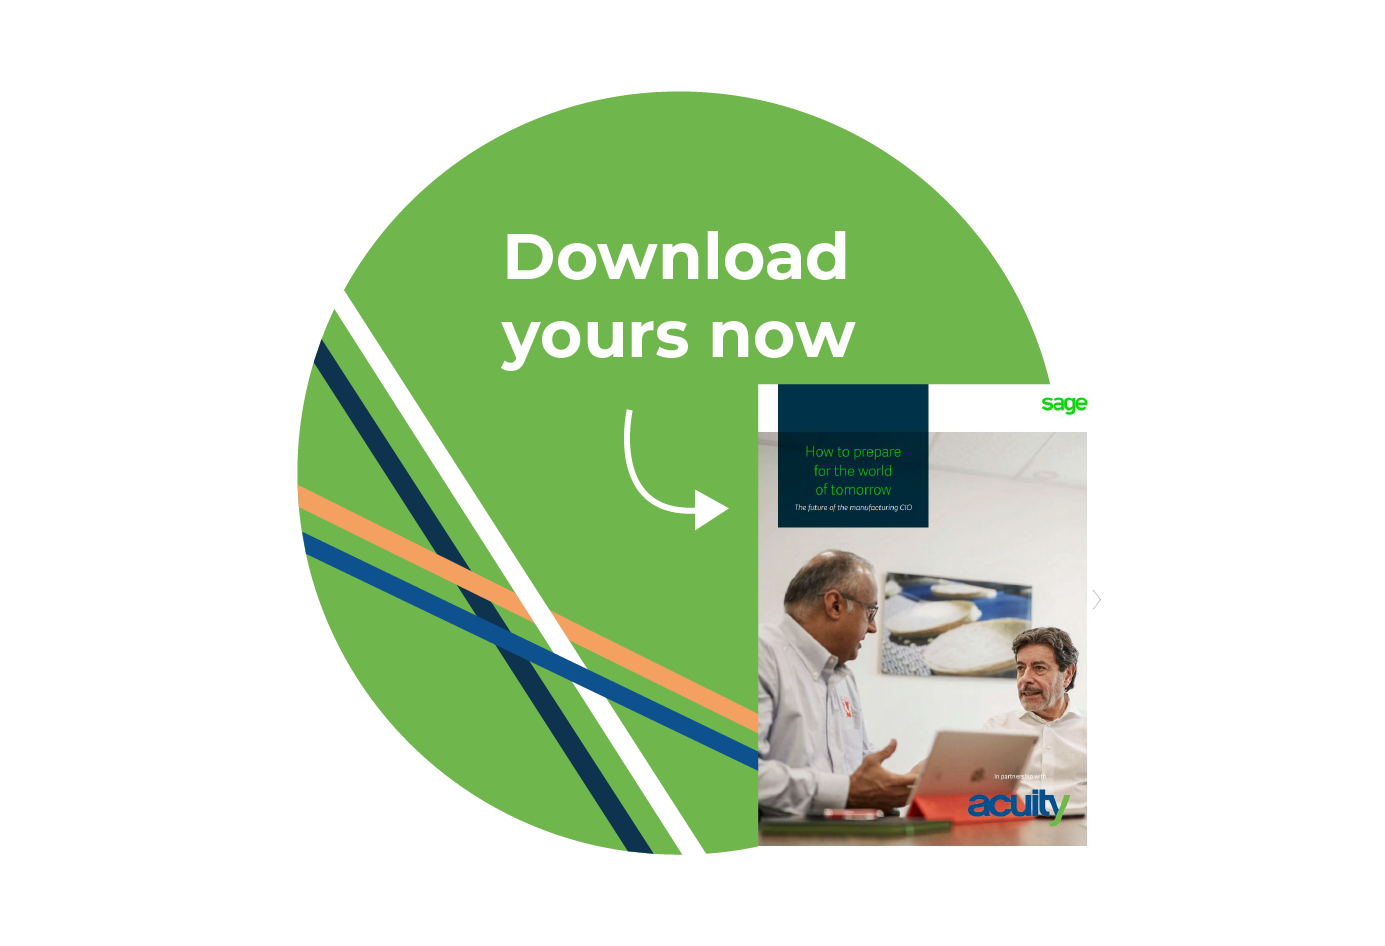 Download your CIO manufacturing guide